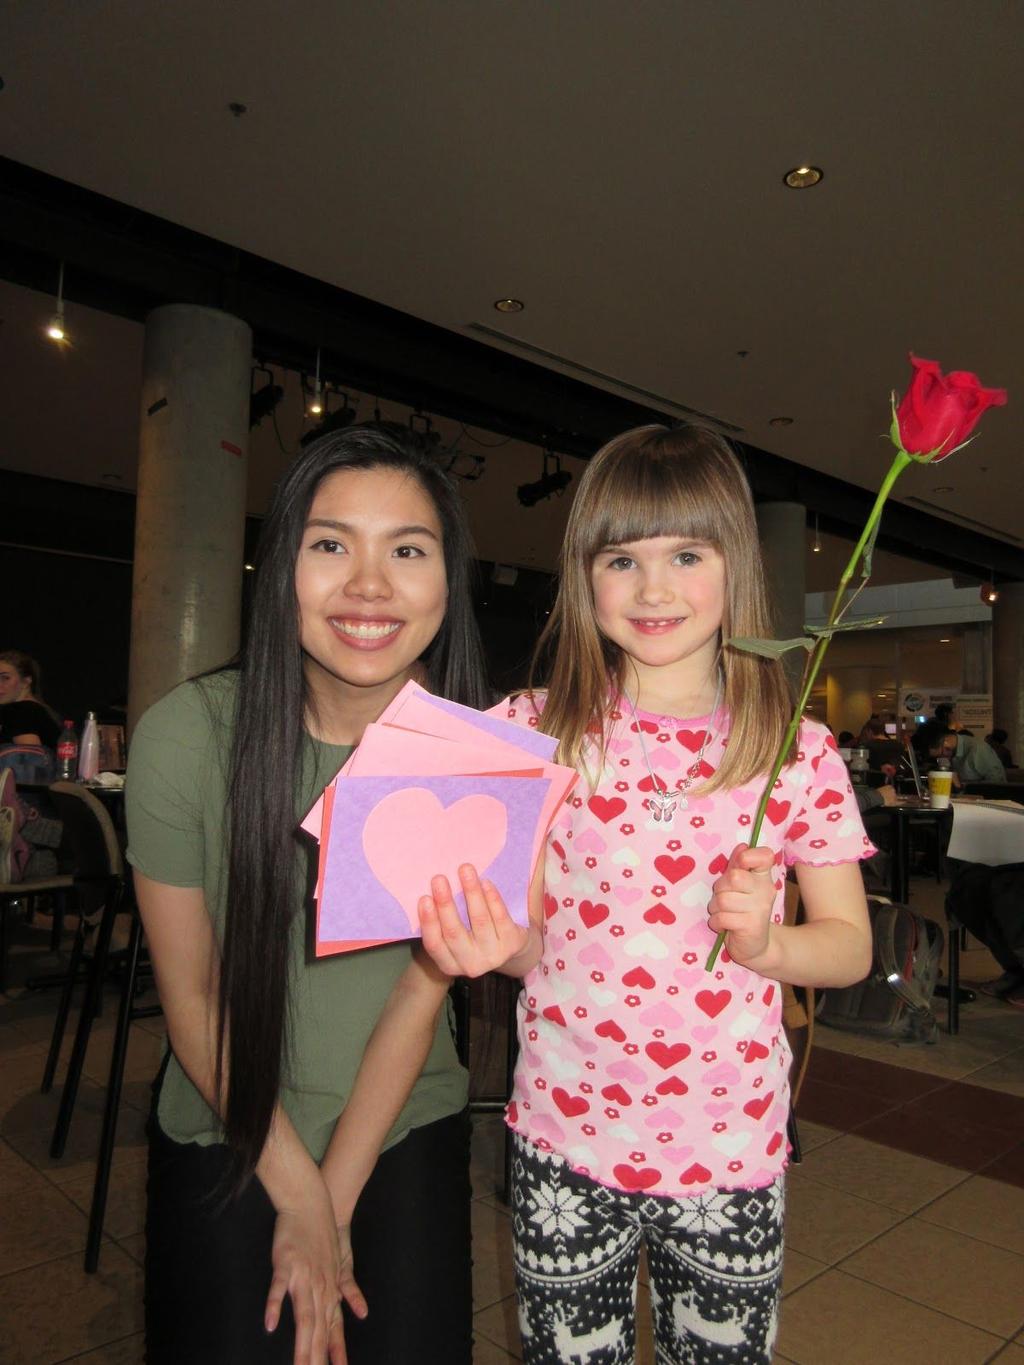 Valentine's Day The Grade 1 students made about